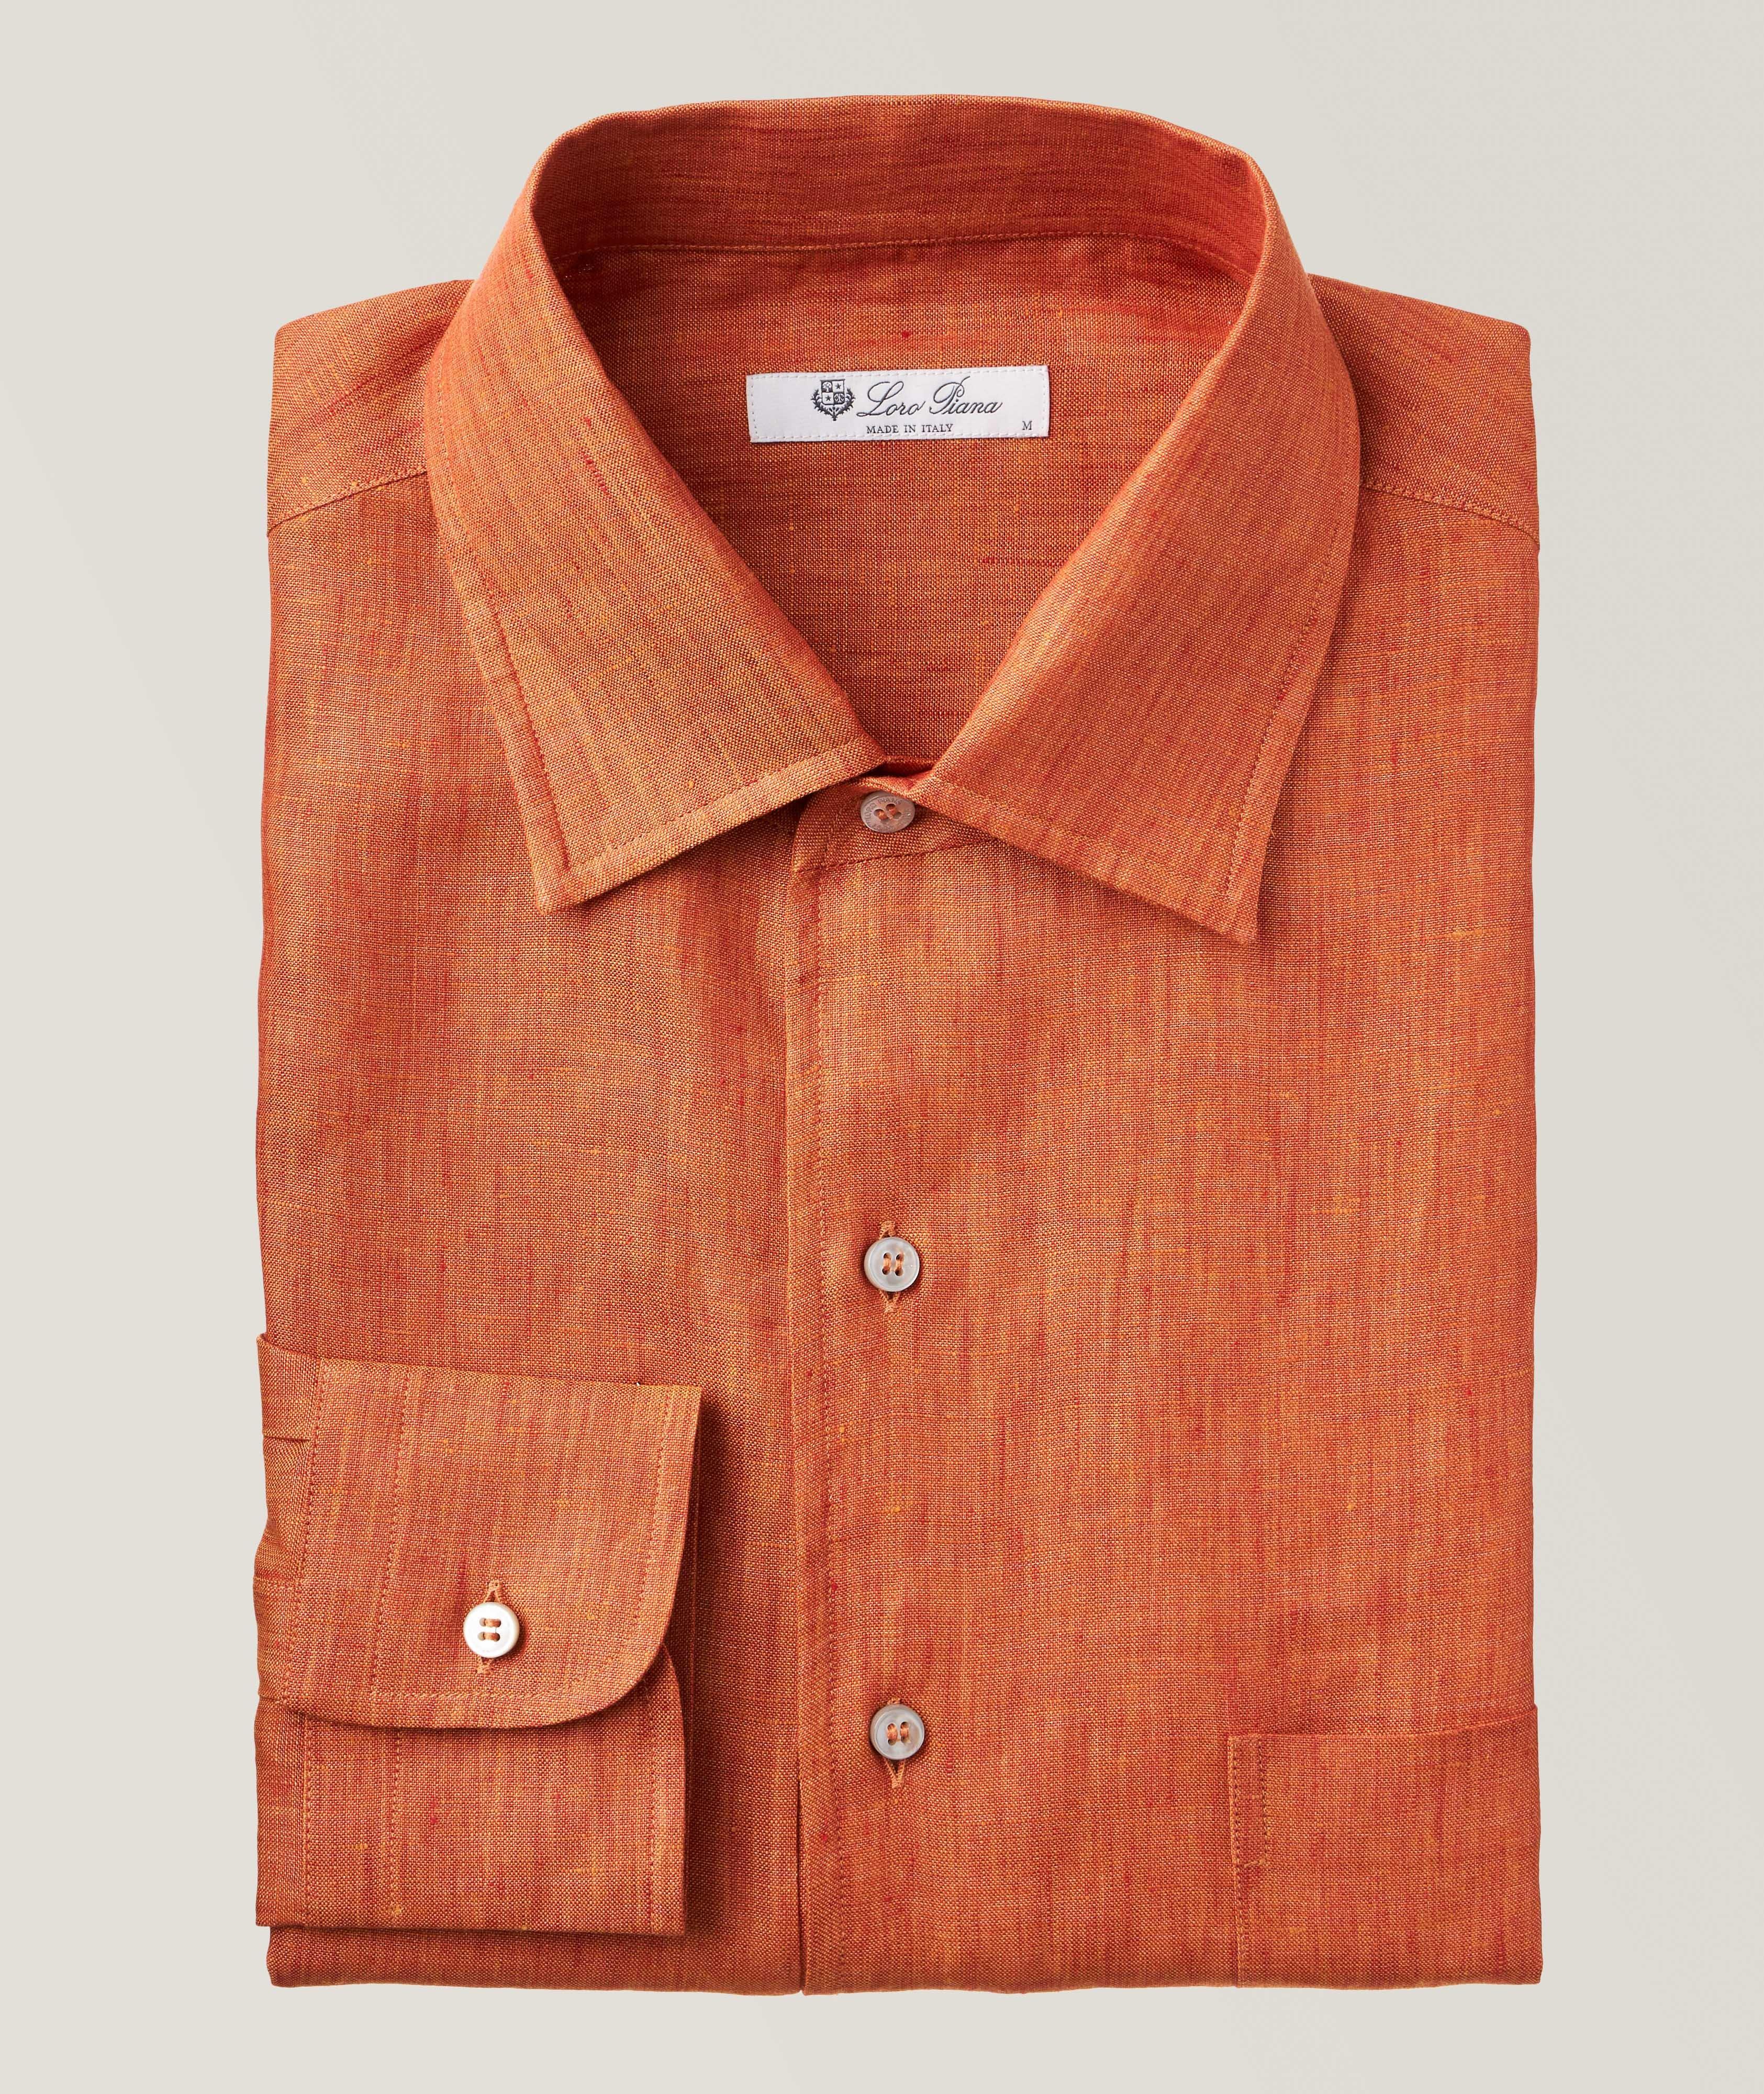 Loro Piana André Collection Flax Sport Shirt